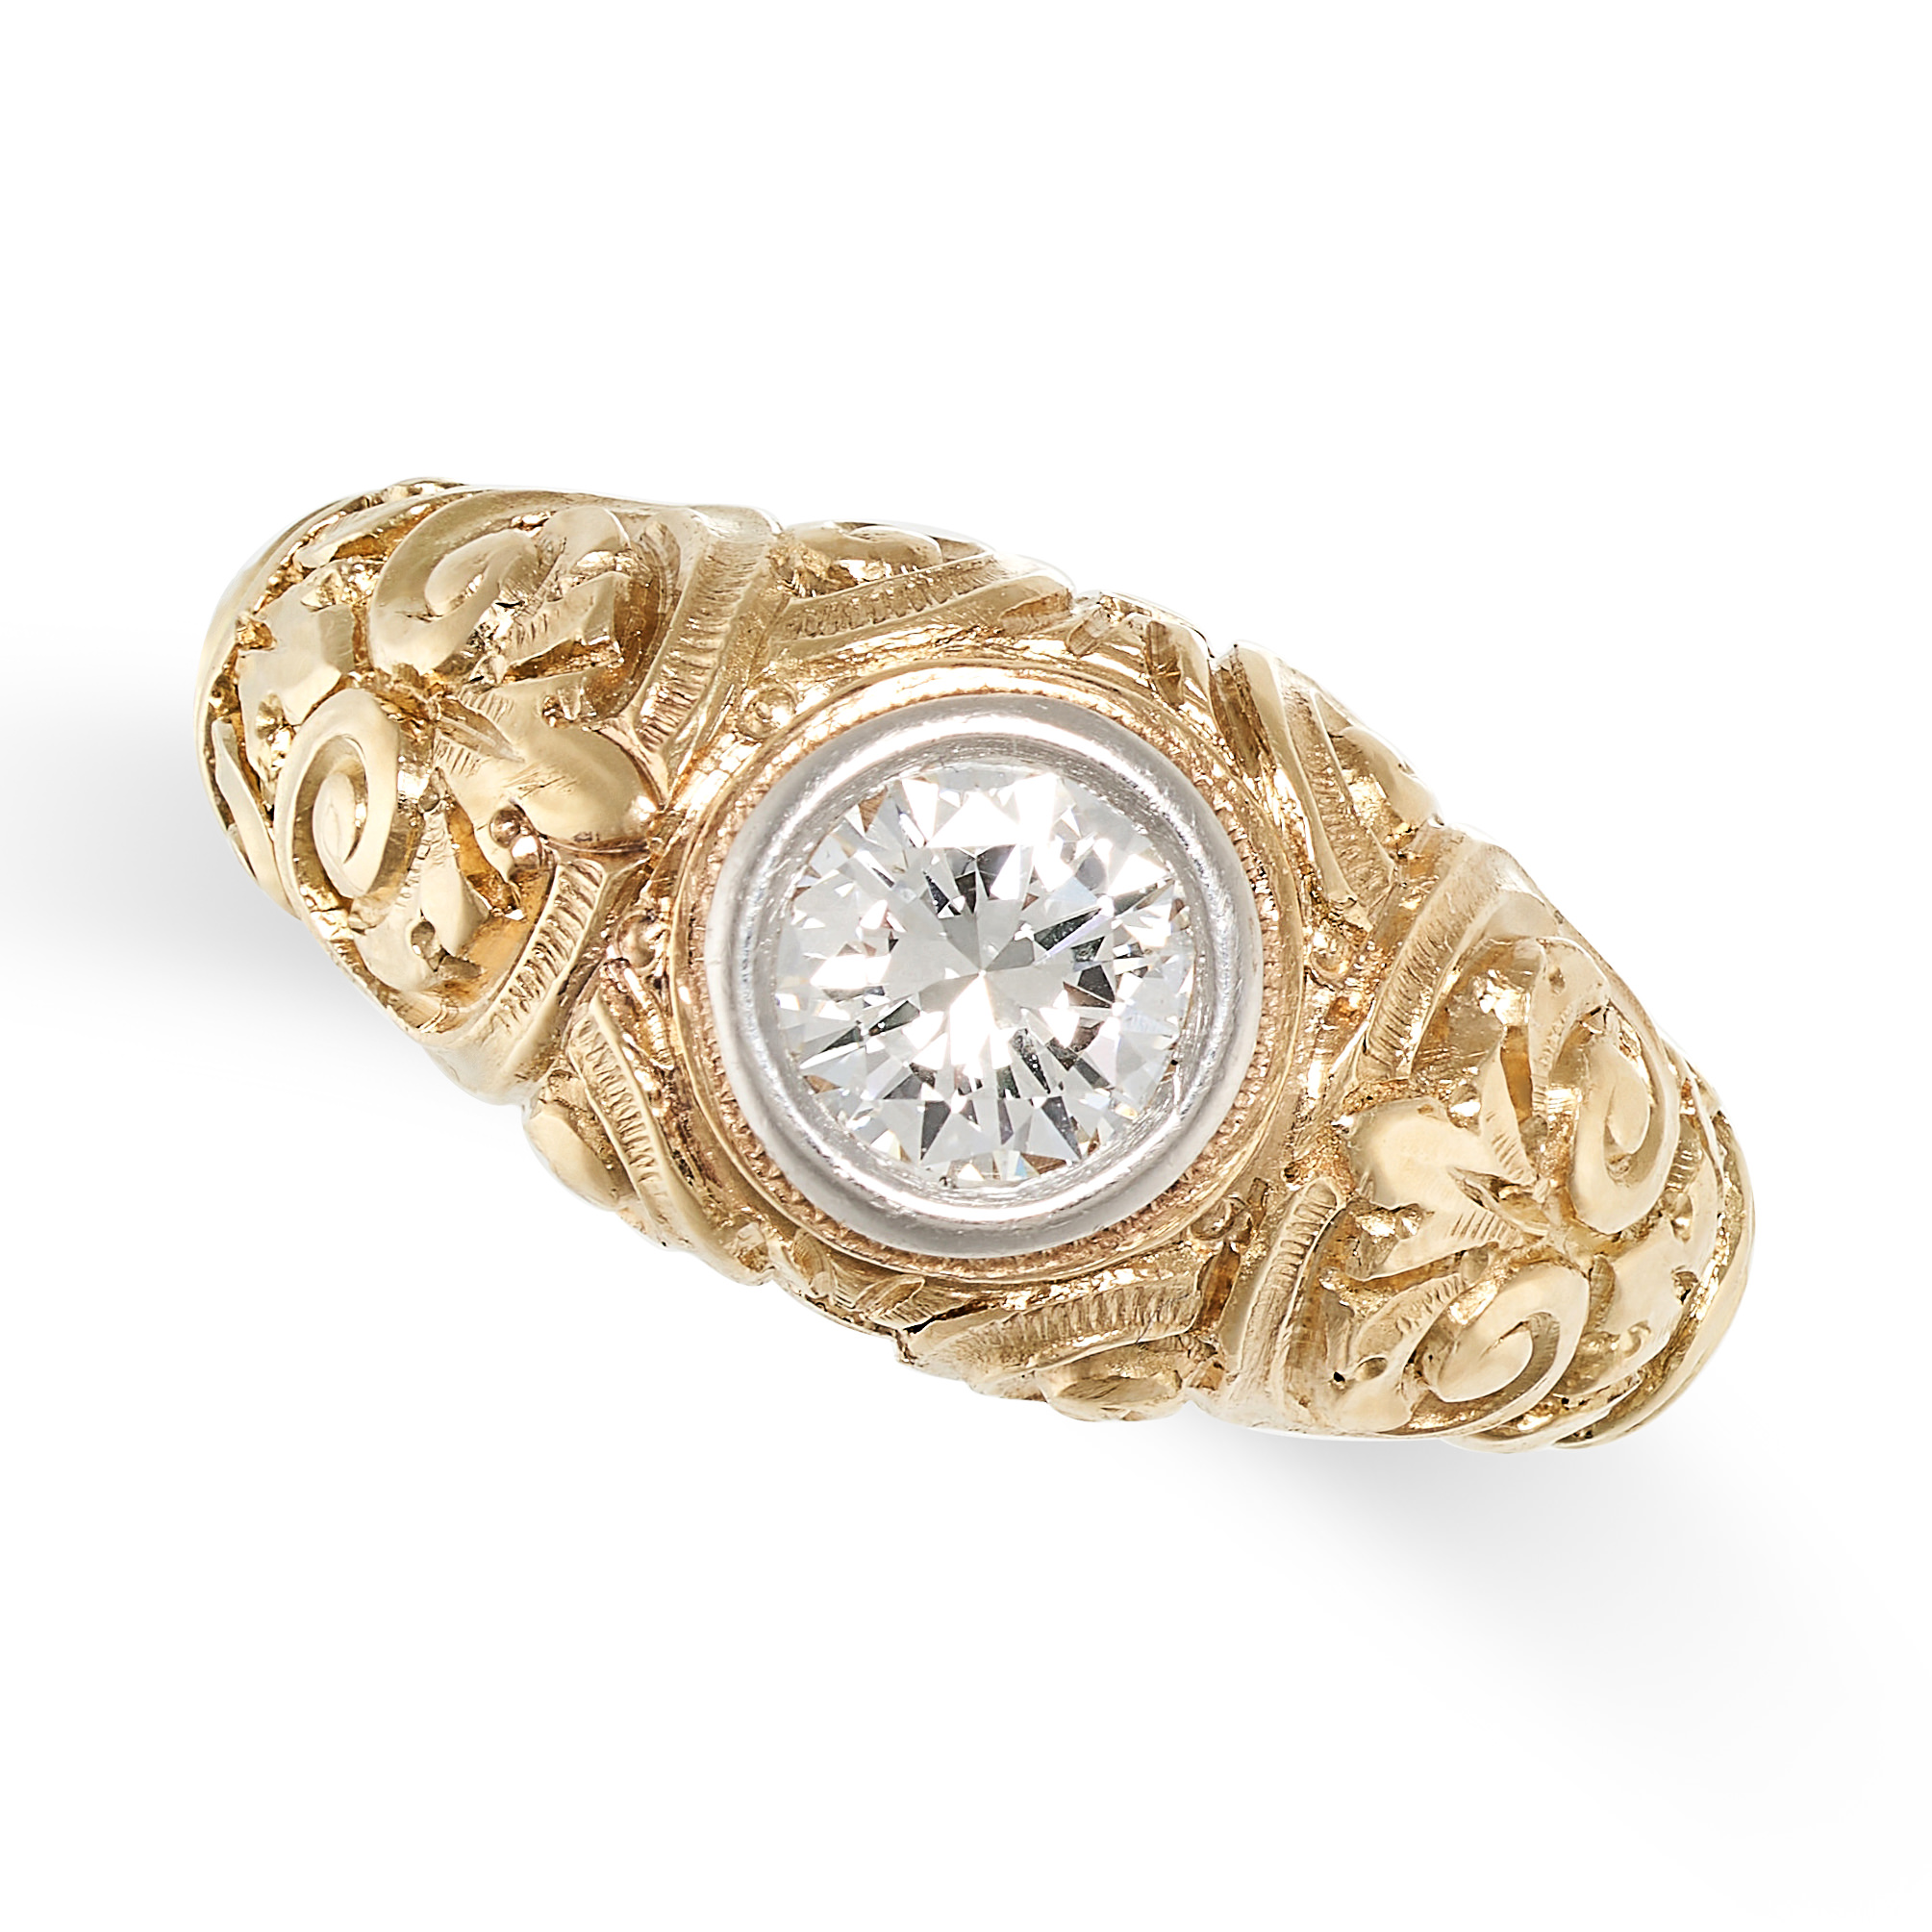 A DIAMOND RING in yellow gold, set with a round brilliant cut diamond of 0.70 carats, the band in